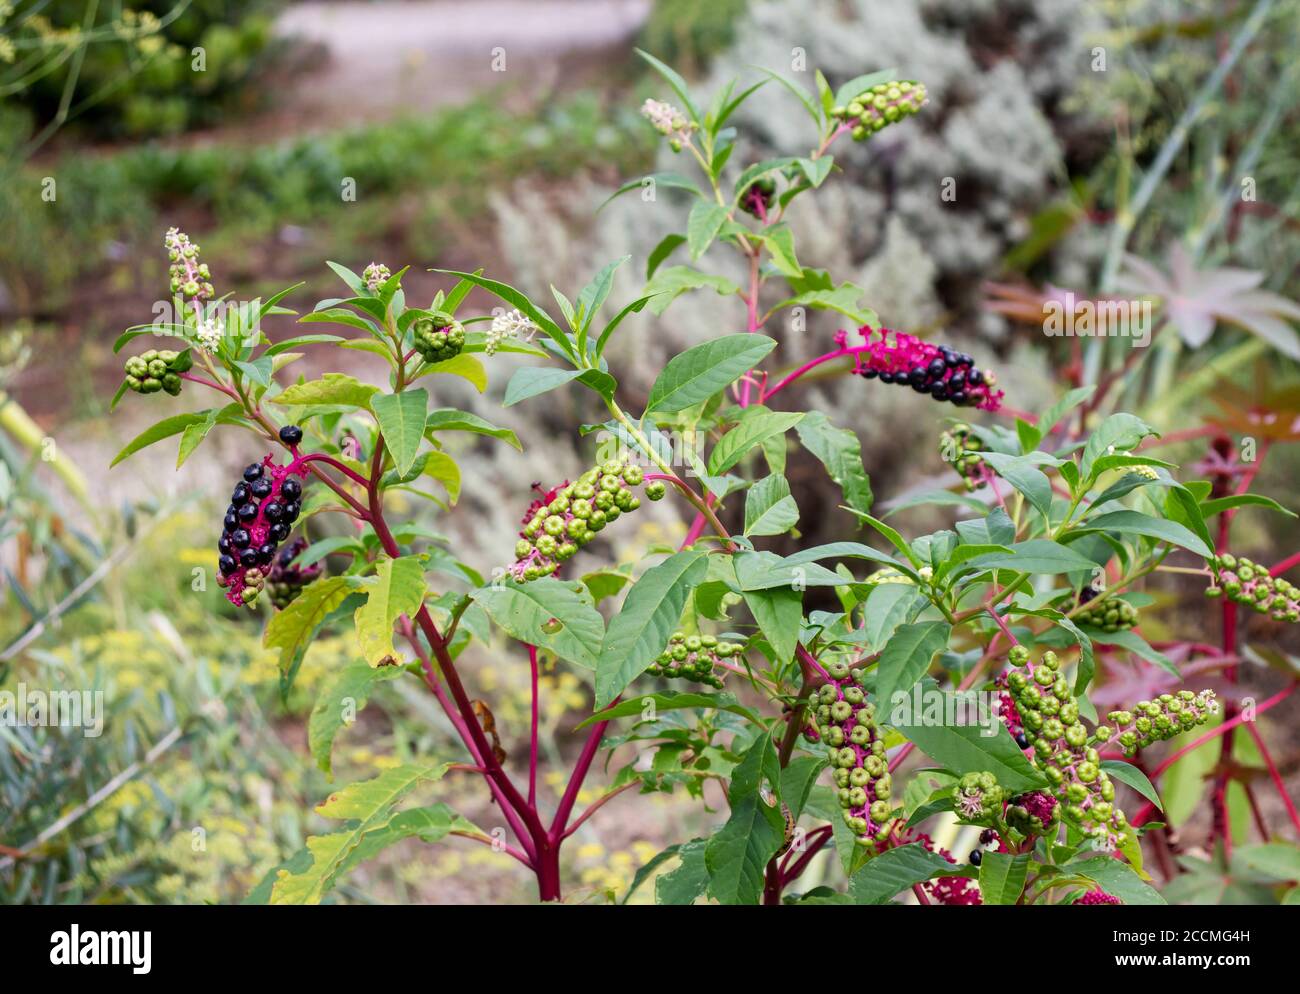 American pokeweed or poke sallet or dragonberries plant with ripe and green berries. Phytolacca americana family Phytolaccaceae. Stock Photo